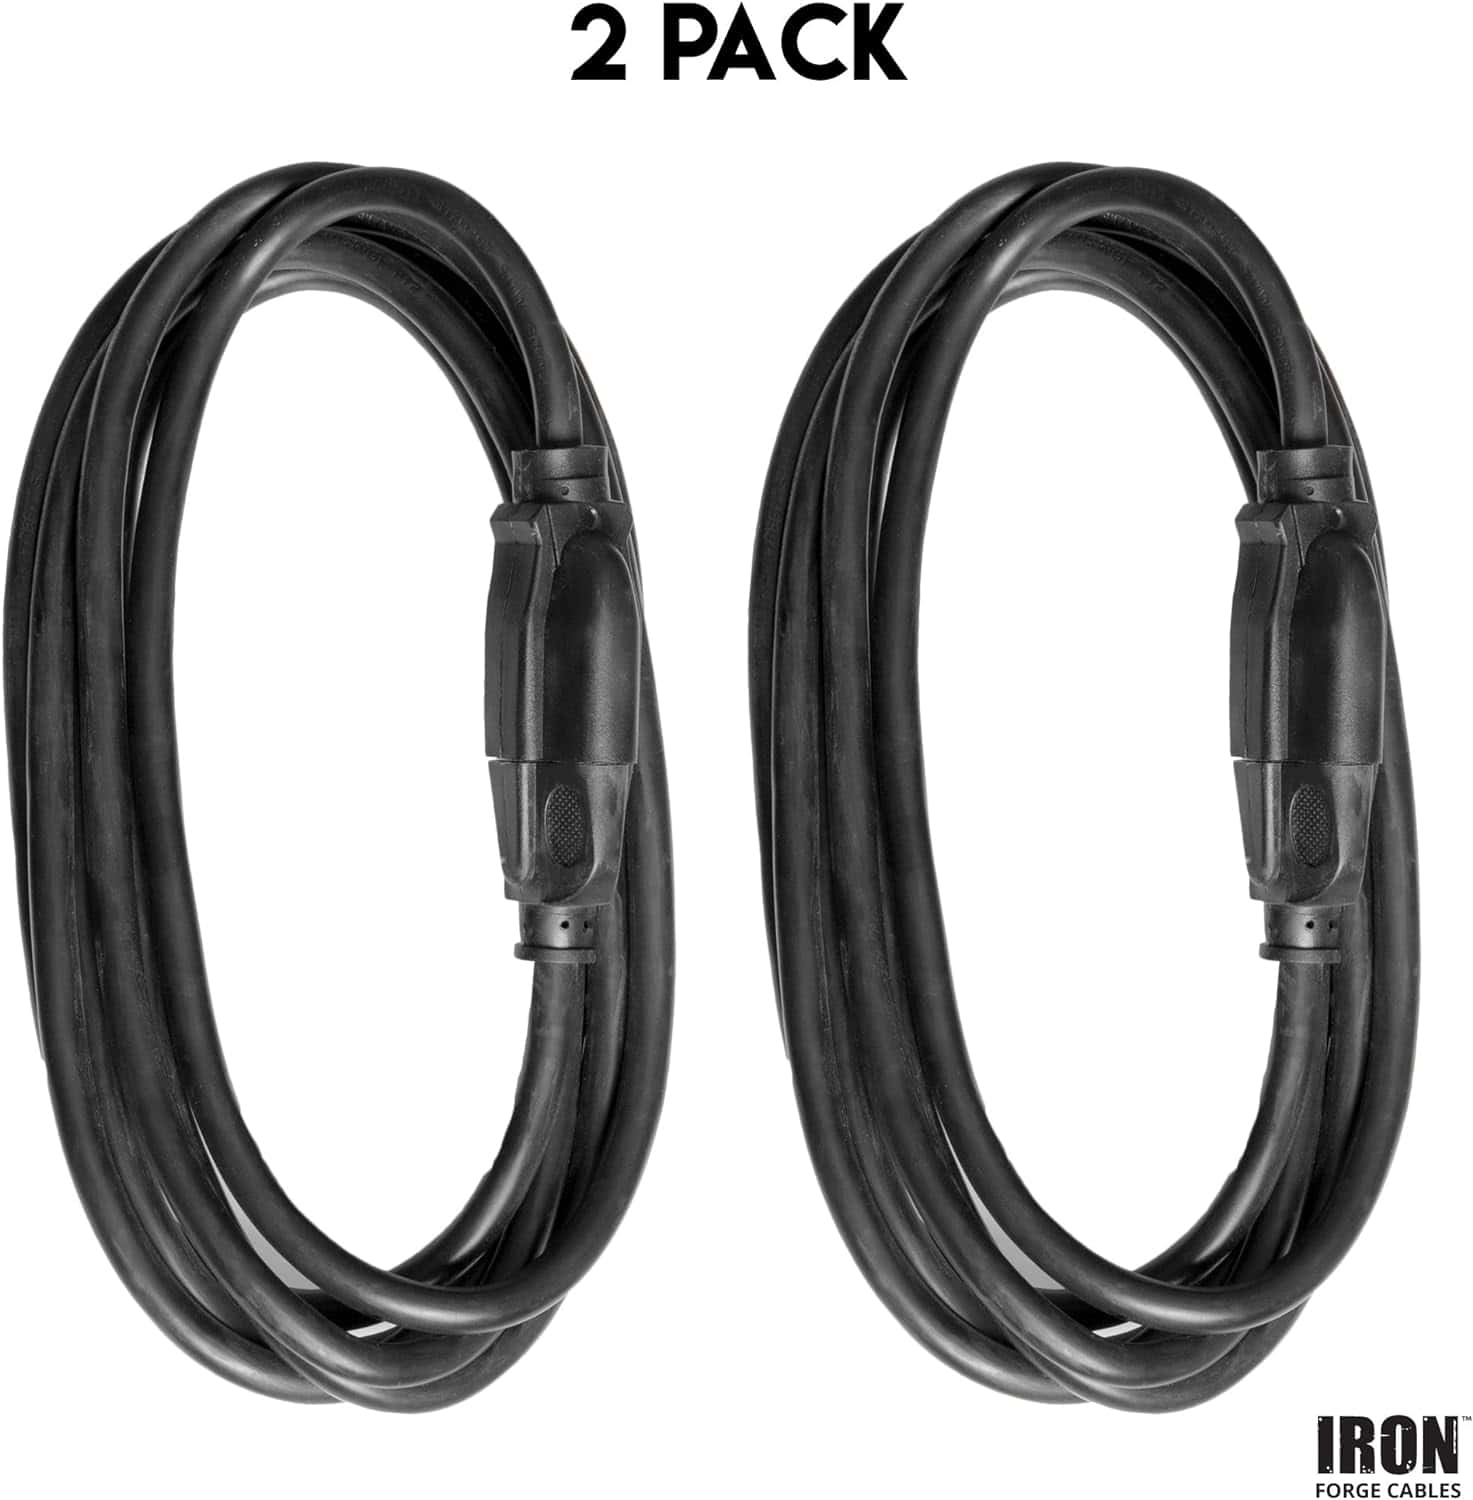 Iron Forge Cable Black Extension Cord 10 Ft, 2 Pack, 16 3 Outdoor Extension Cord 3 Prong 13 AMP, SJTW Weatherproof Exterior Power Cable 10 Foot Great for Outdoor Lights Decoration Leaf Blower 2